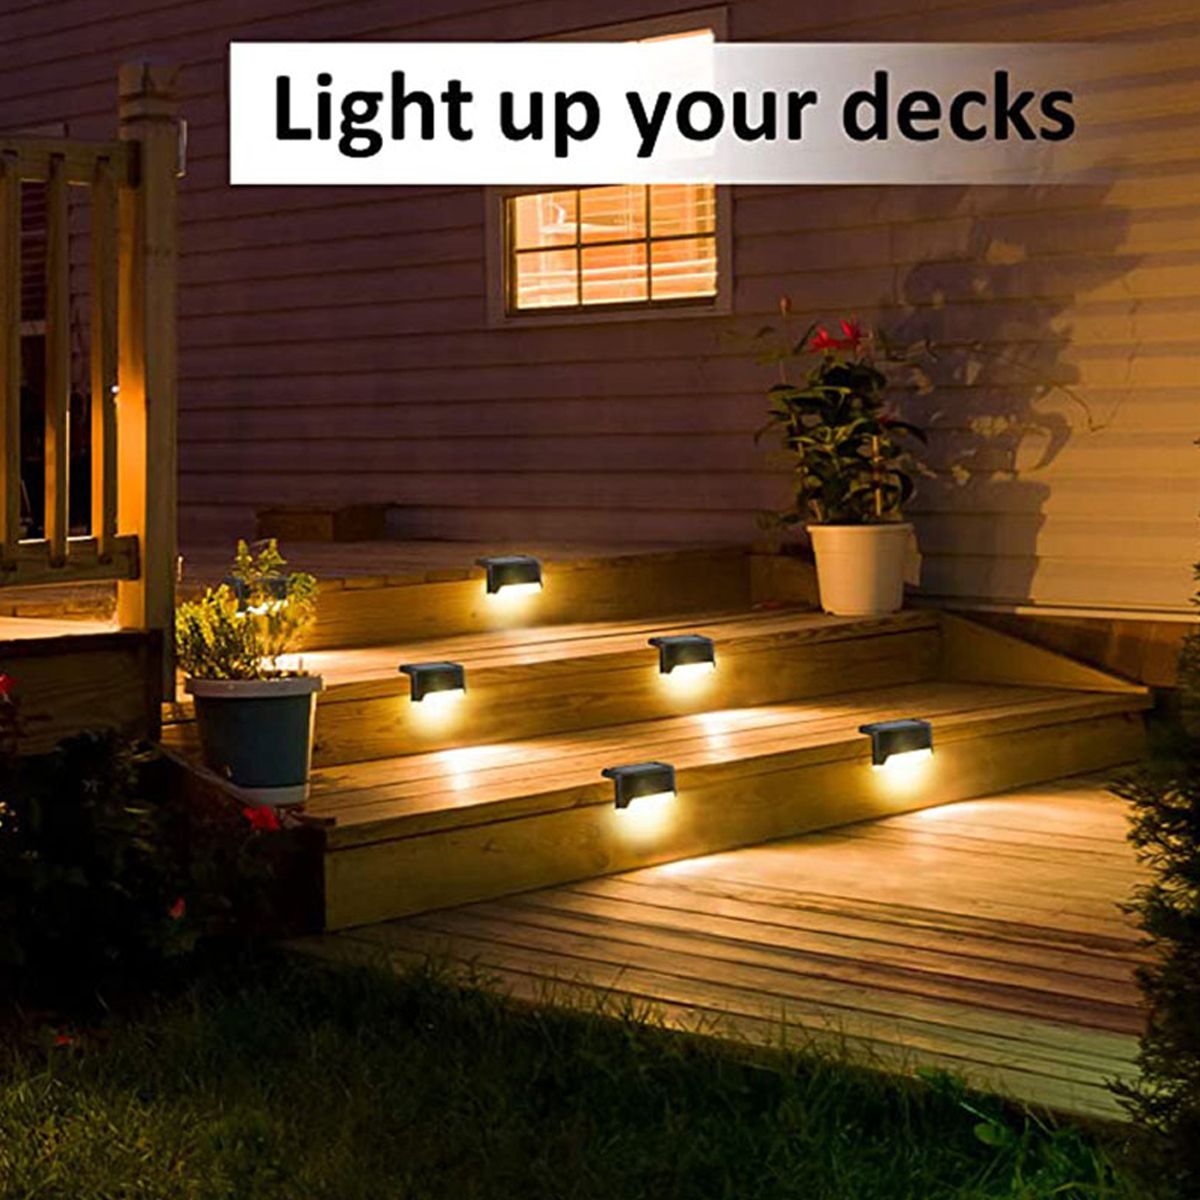 4PCS-LED-Solar-Path-Stair-Lamp-Outdoor-Waterproof-Wall-Lawn-Light-for-Garden-Home-1754581